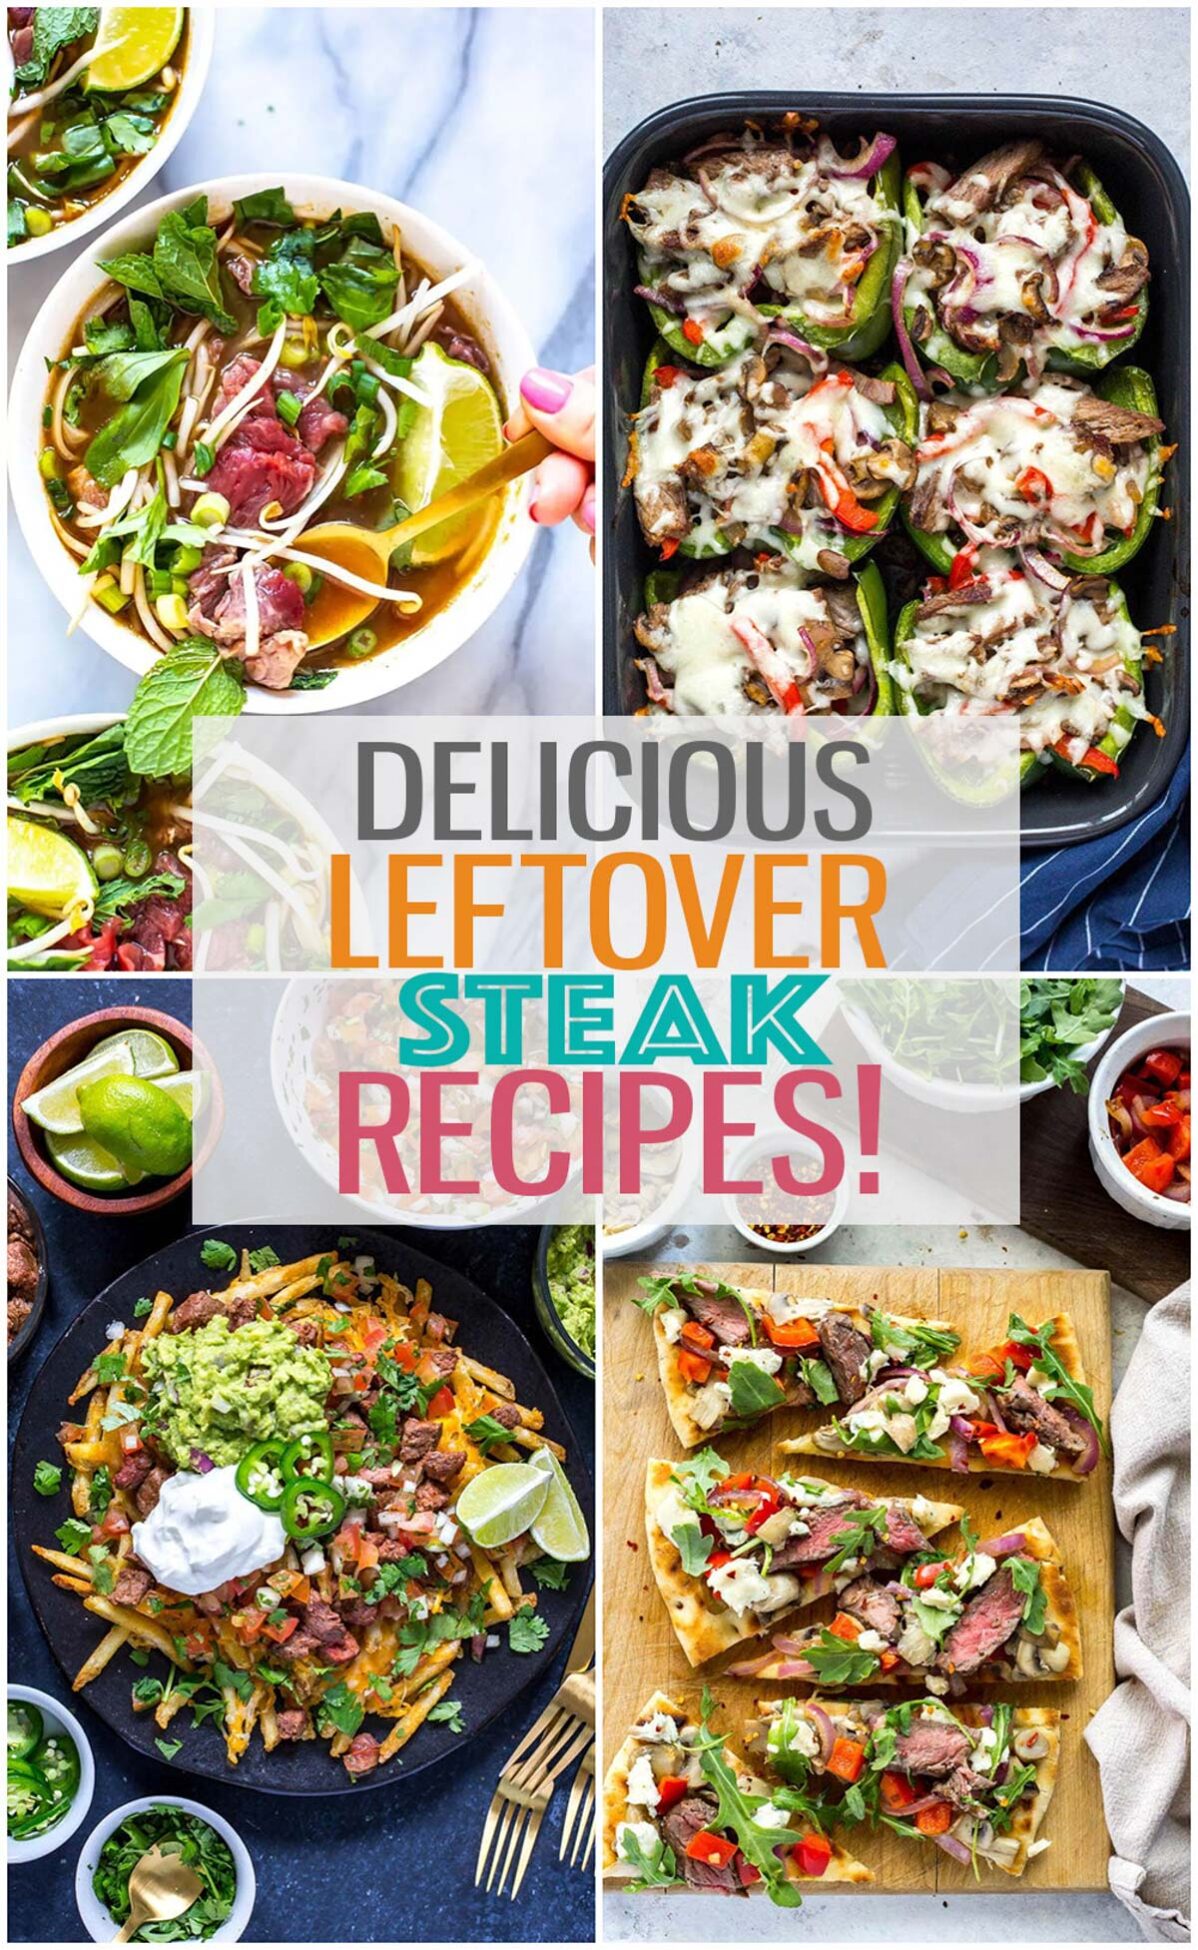 A collage of four different steak recipes with the text "Delicious Leftover Steak Recipes!" layered over top. 